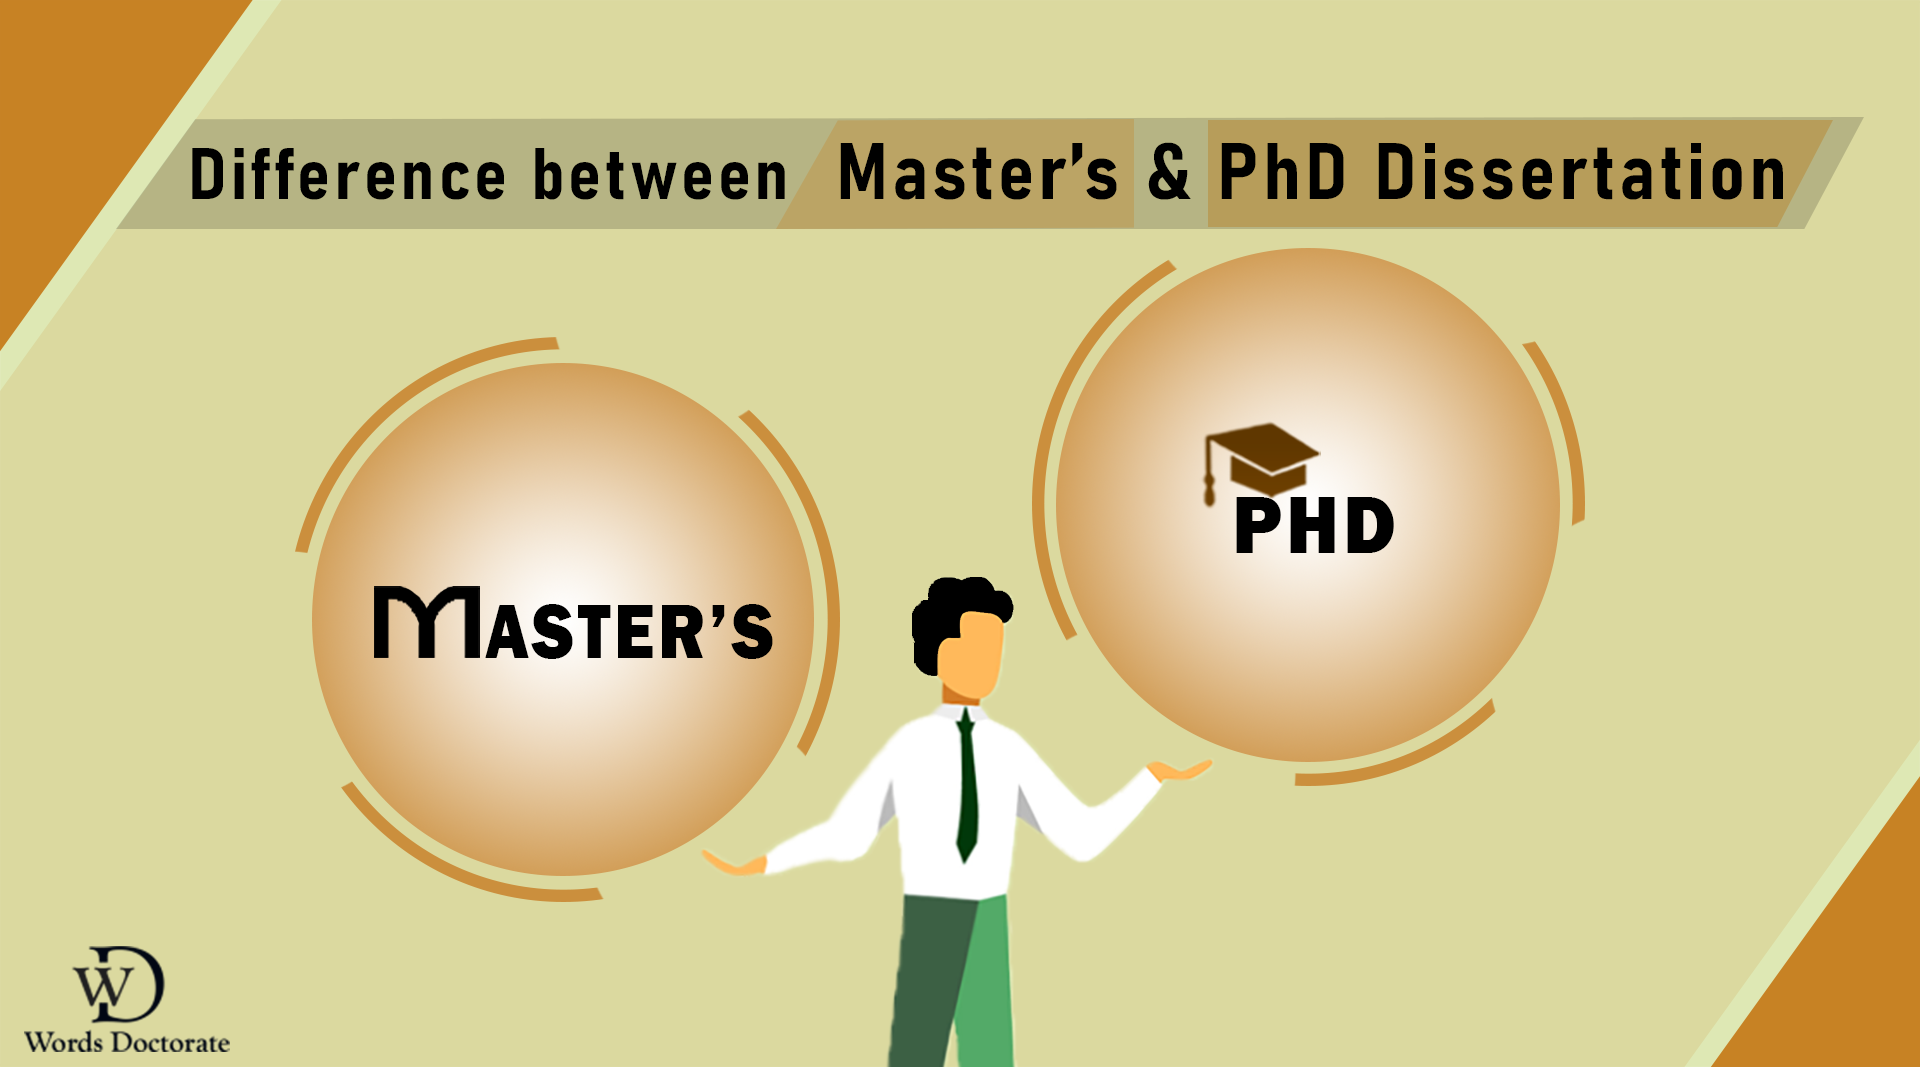 Difference between Master’s & PhD Dissertations